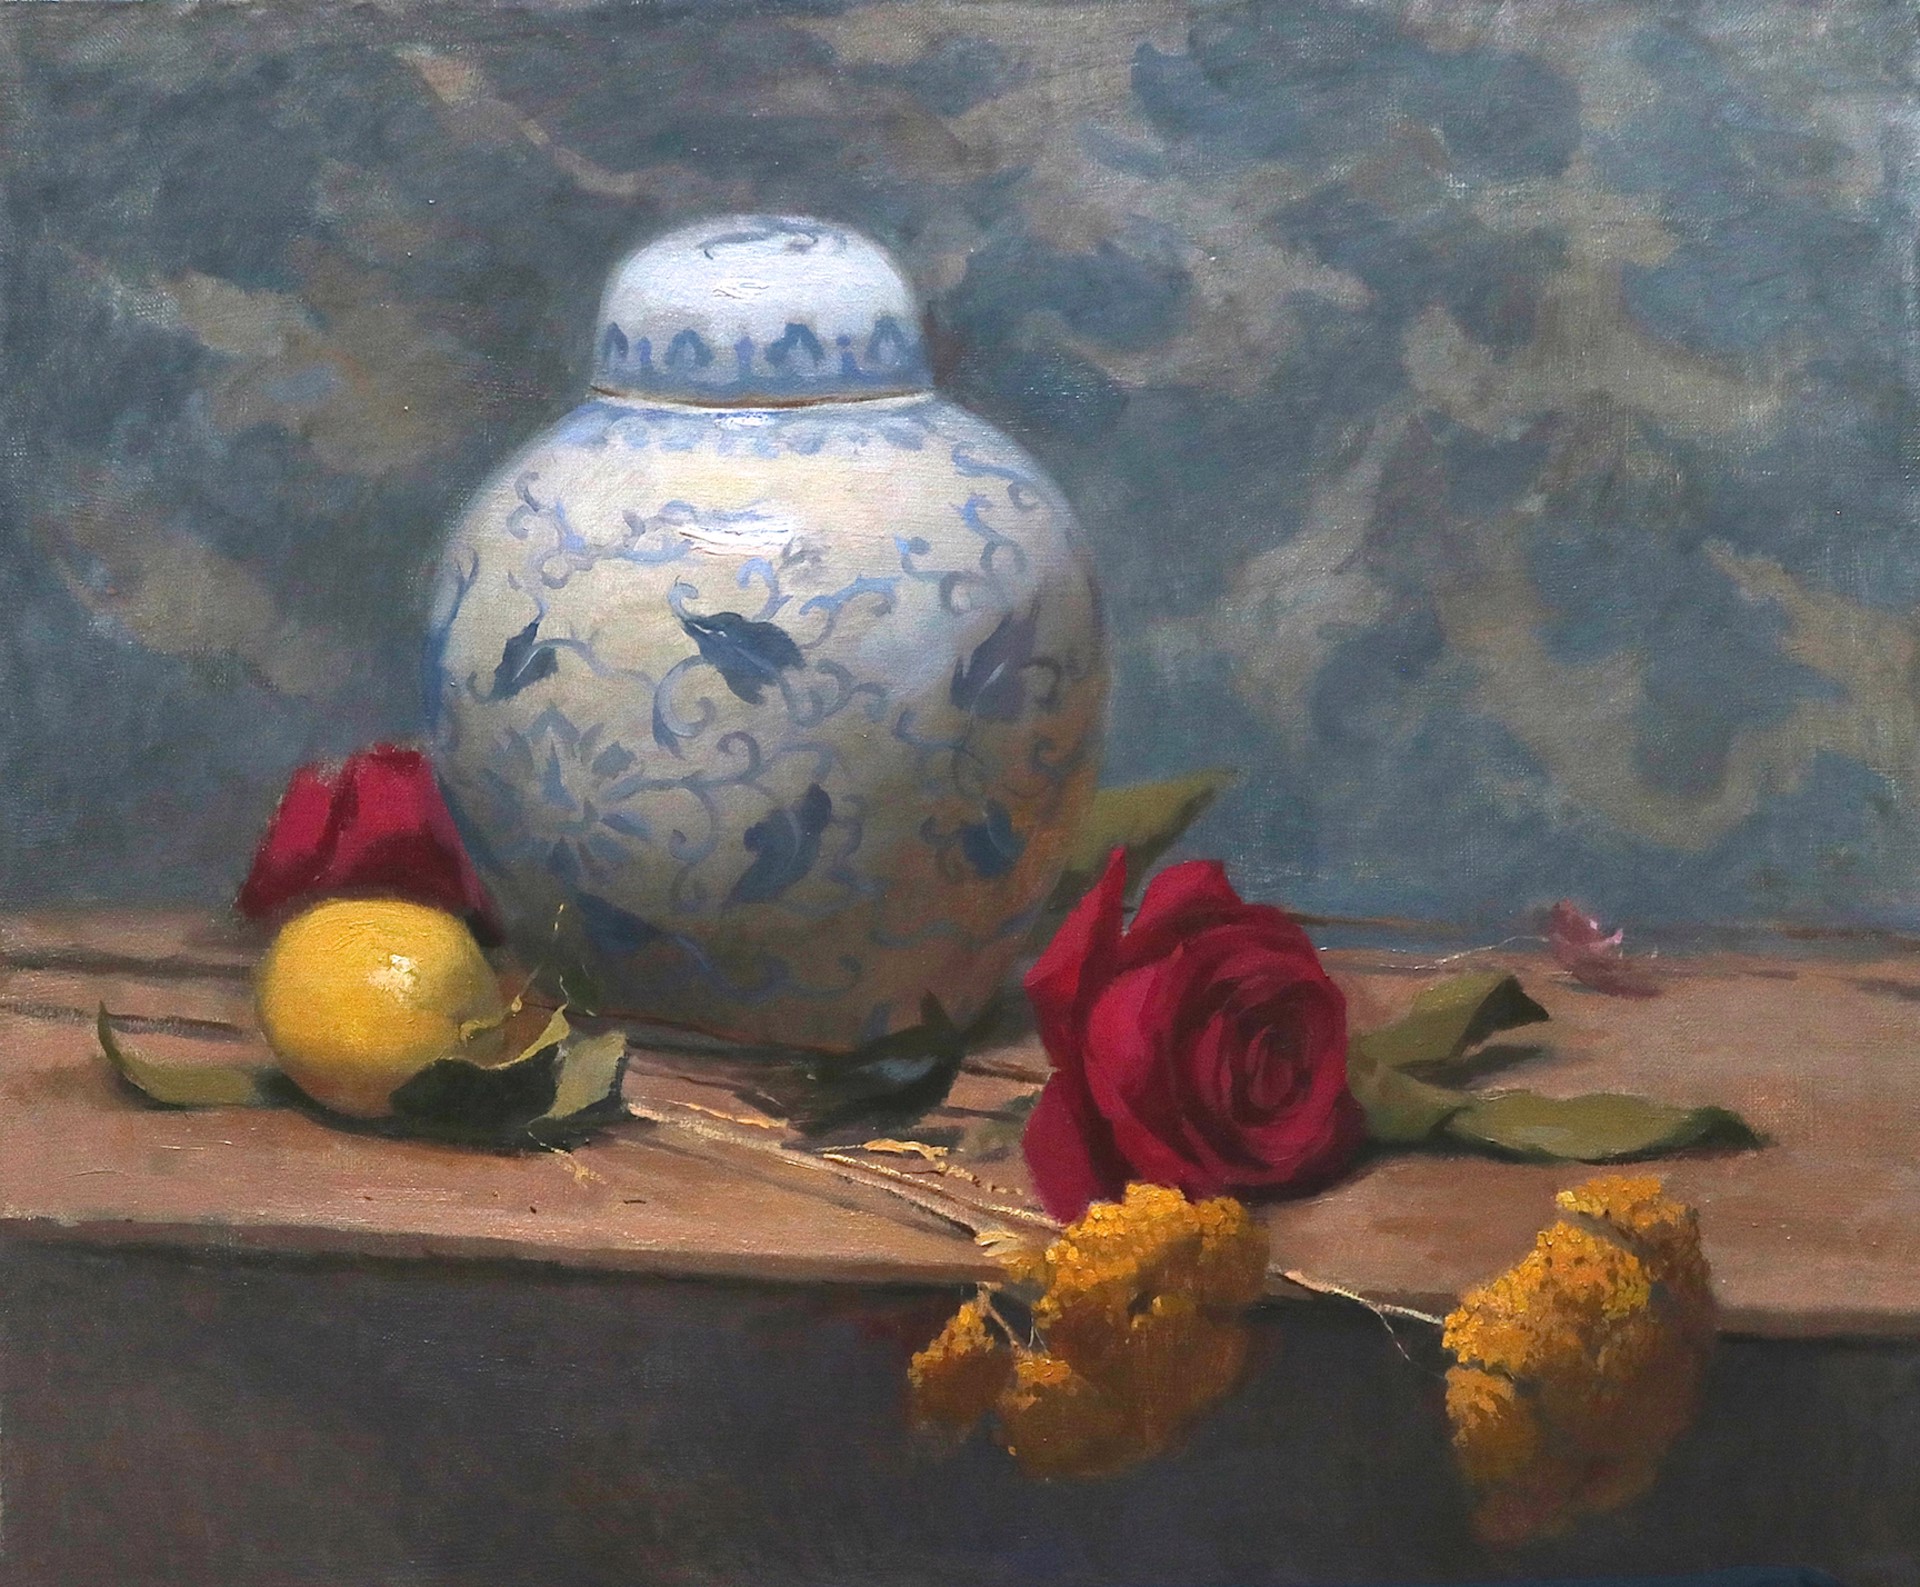 Composition with Blue China and Flowers by Tanvi Pathare